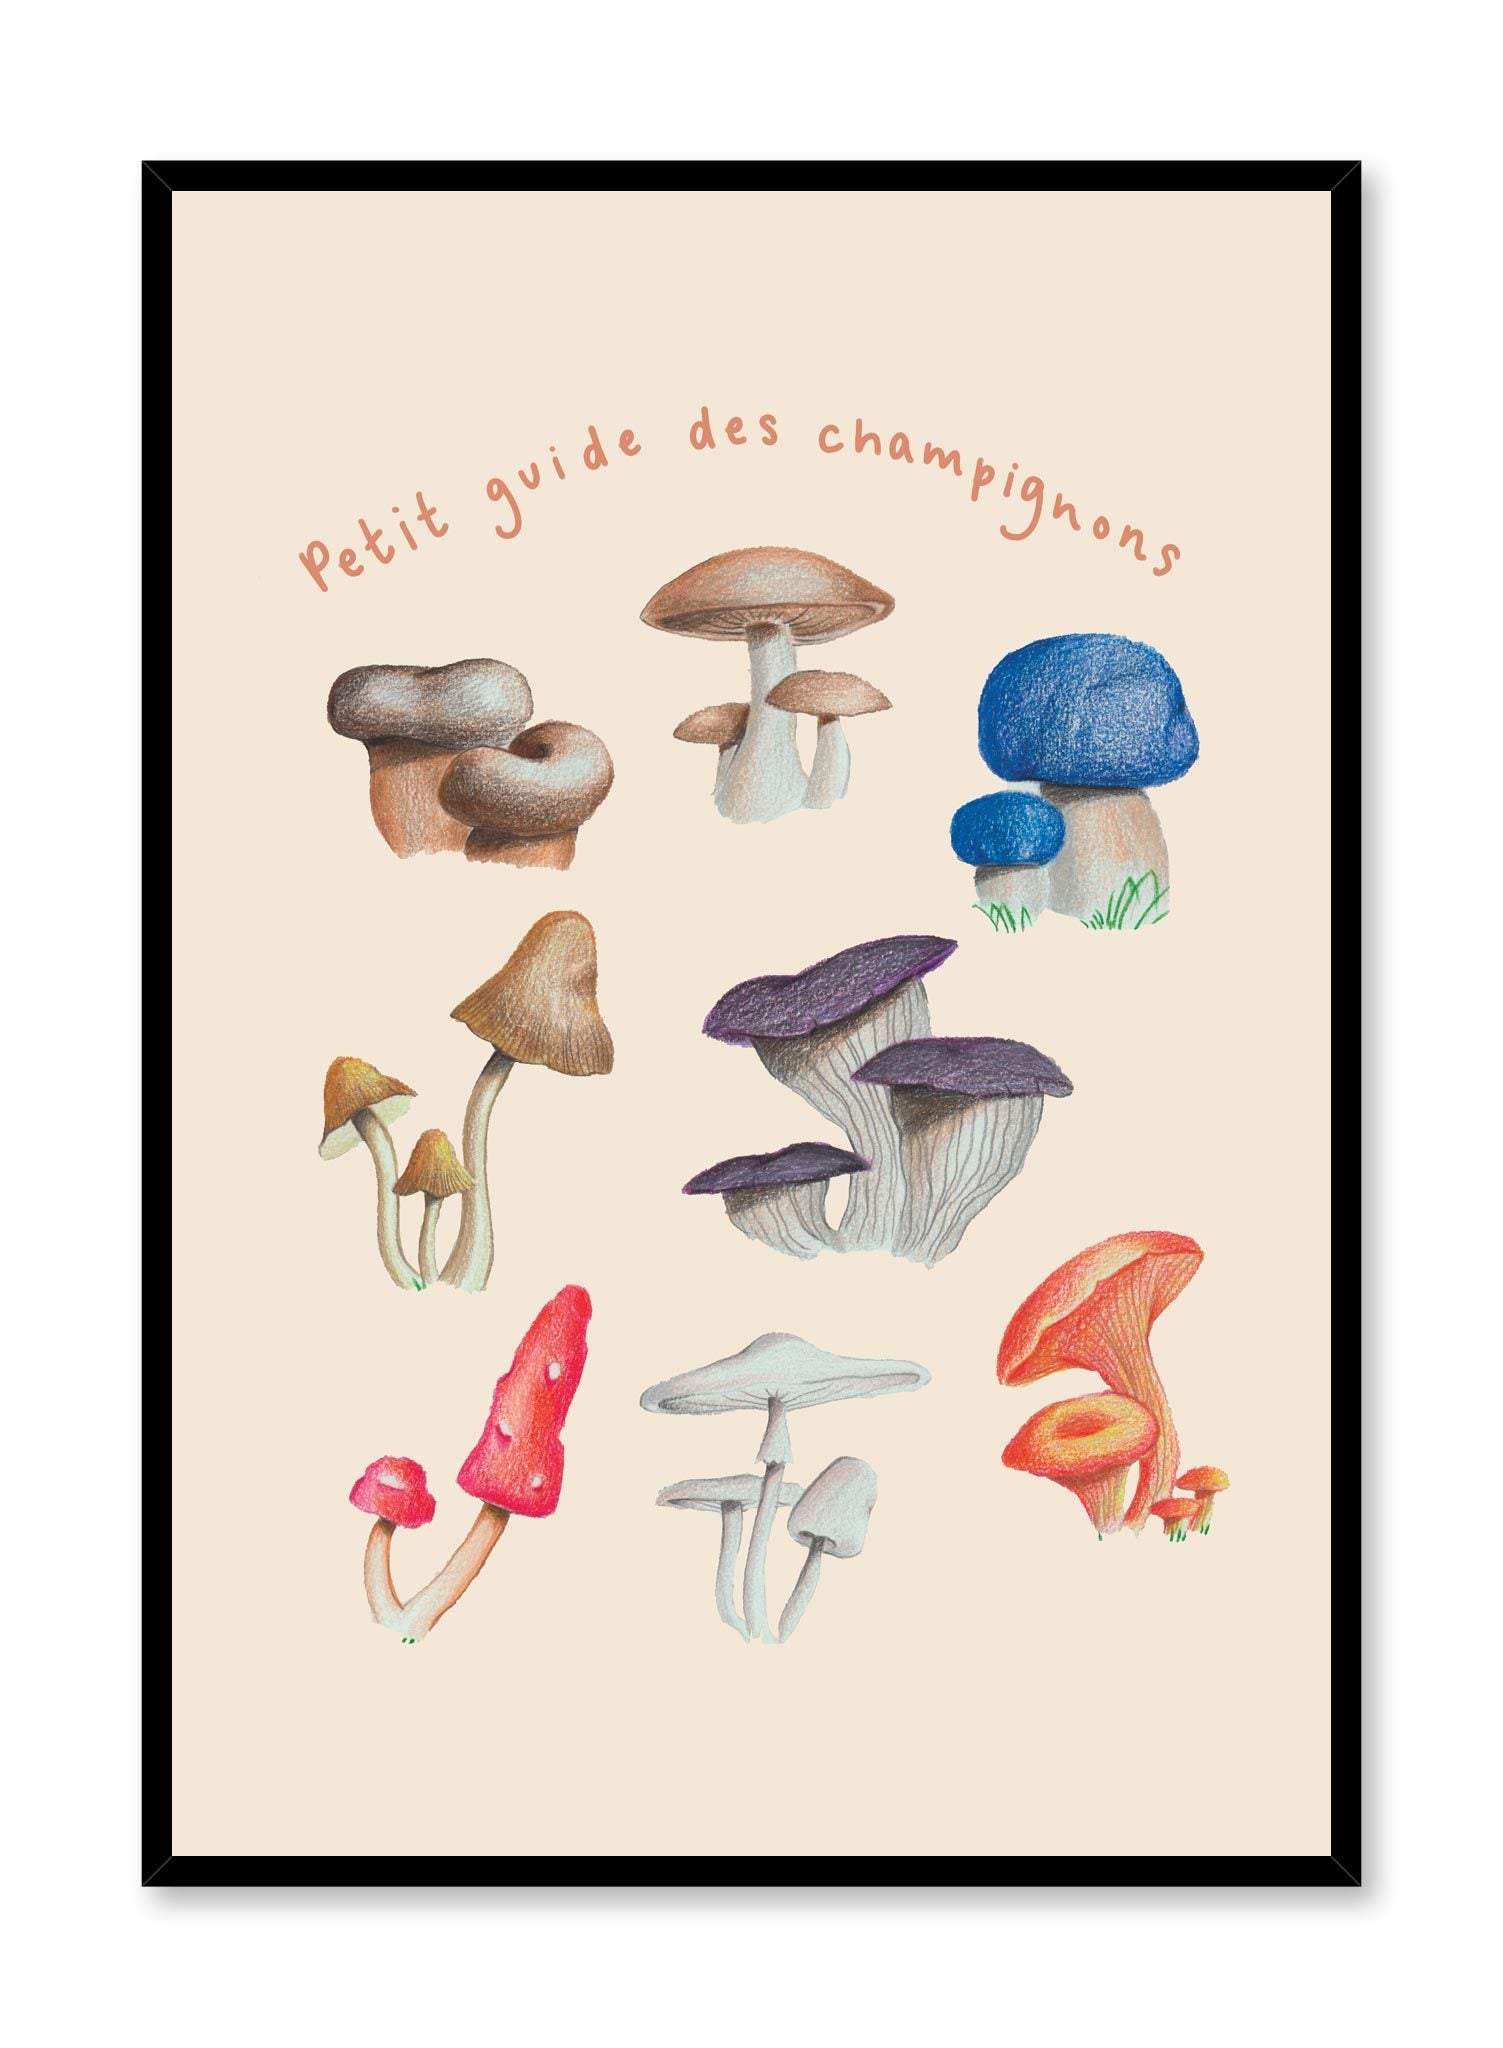 Mushroom Harvest in French is a minimalist illustration by Opposite Wall of an assortment of different types and colours of mushrooms.